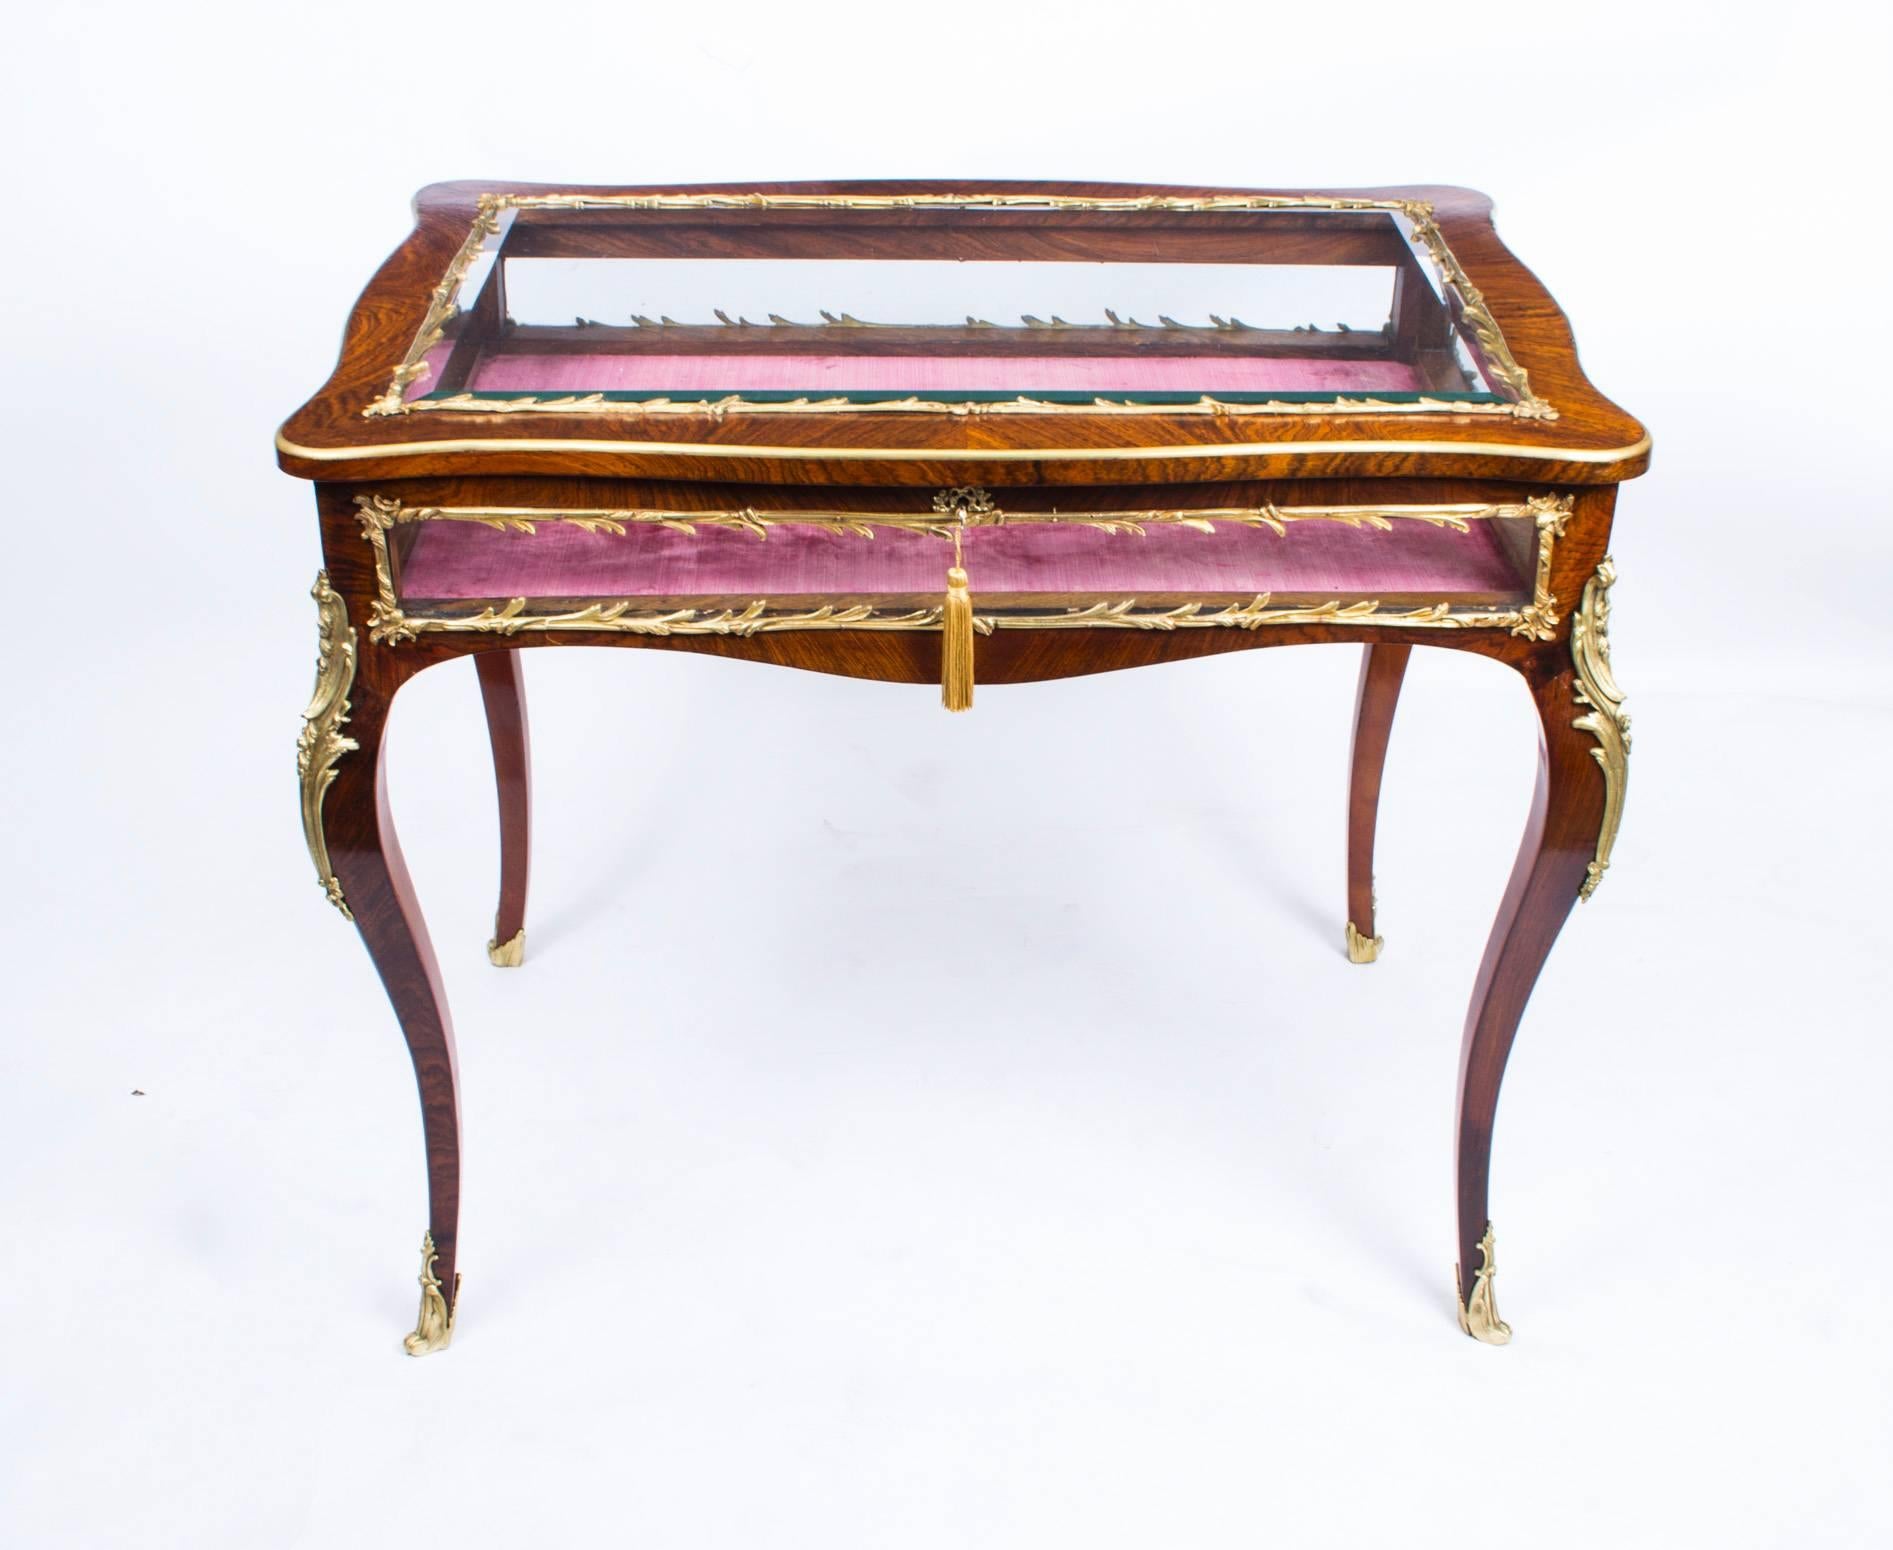 This is a beautiful antique French rosewood and ormolu mounted bijouterie display table in the Louis XV style, circa 1880 in date.

The display table features a bevelled glass top and glass sides, it has it's original pink velvet lining.

The